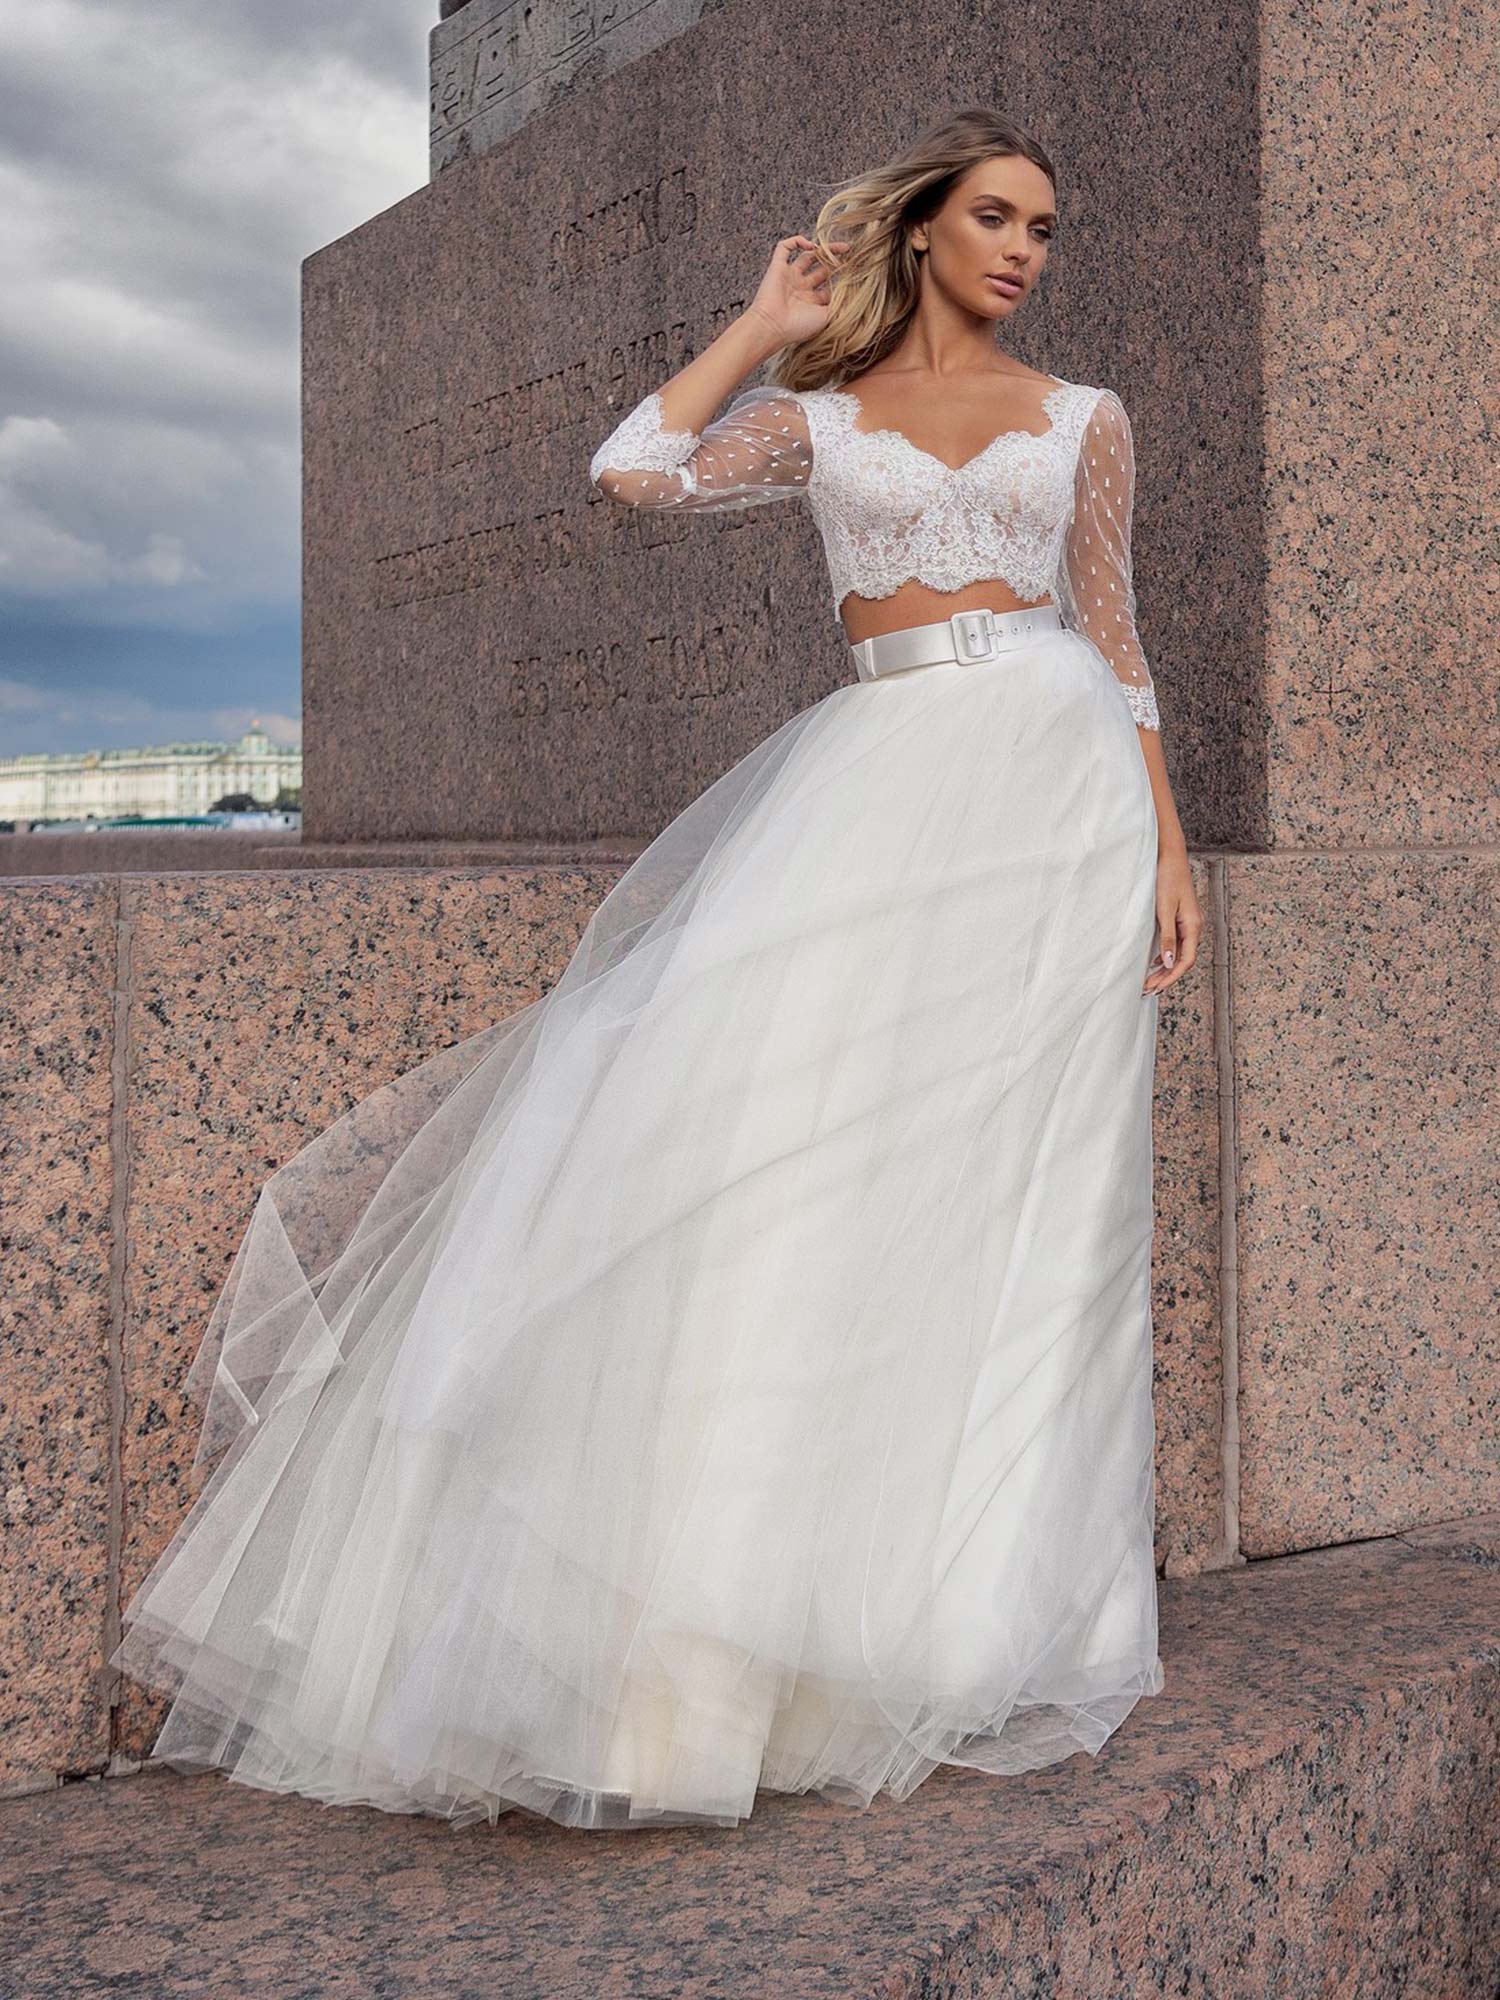 Bridal Tulle Top, Tulle Long Sleeve Bridal Top